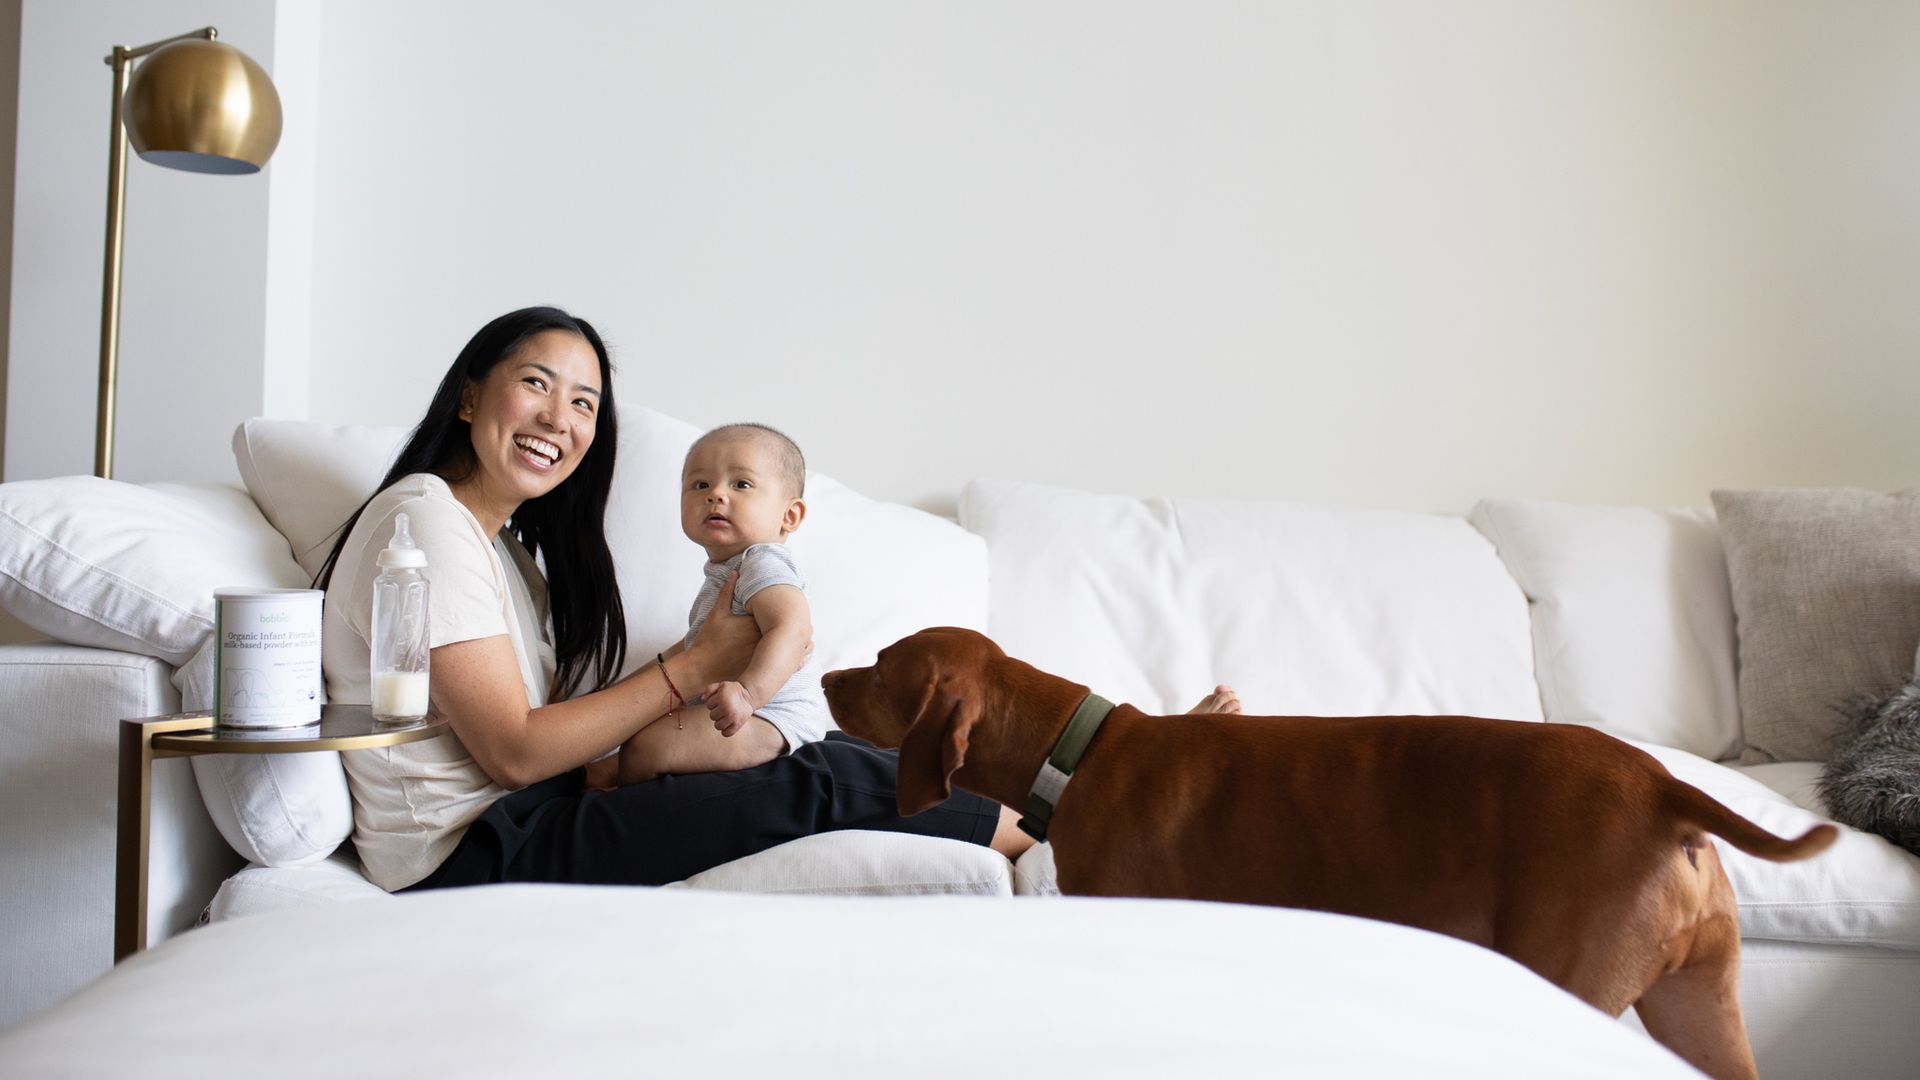 A smiling woman with long black hair holds an infant while reclining on a white sofa. Next to her on a tray table sits a package of infant formula and a baby bottle. A brown dog investigates..